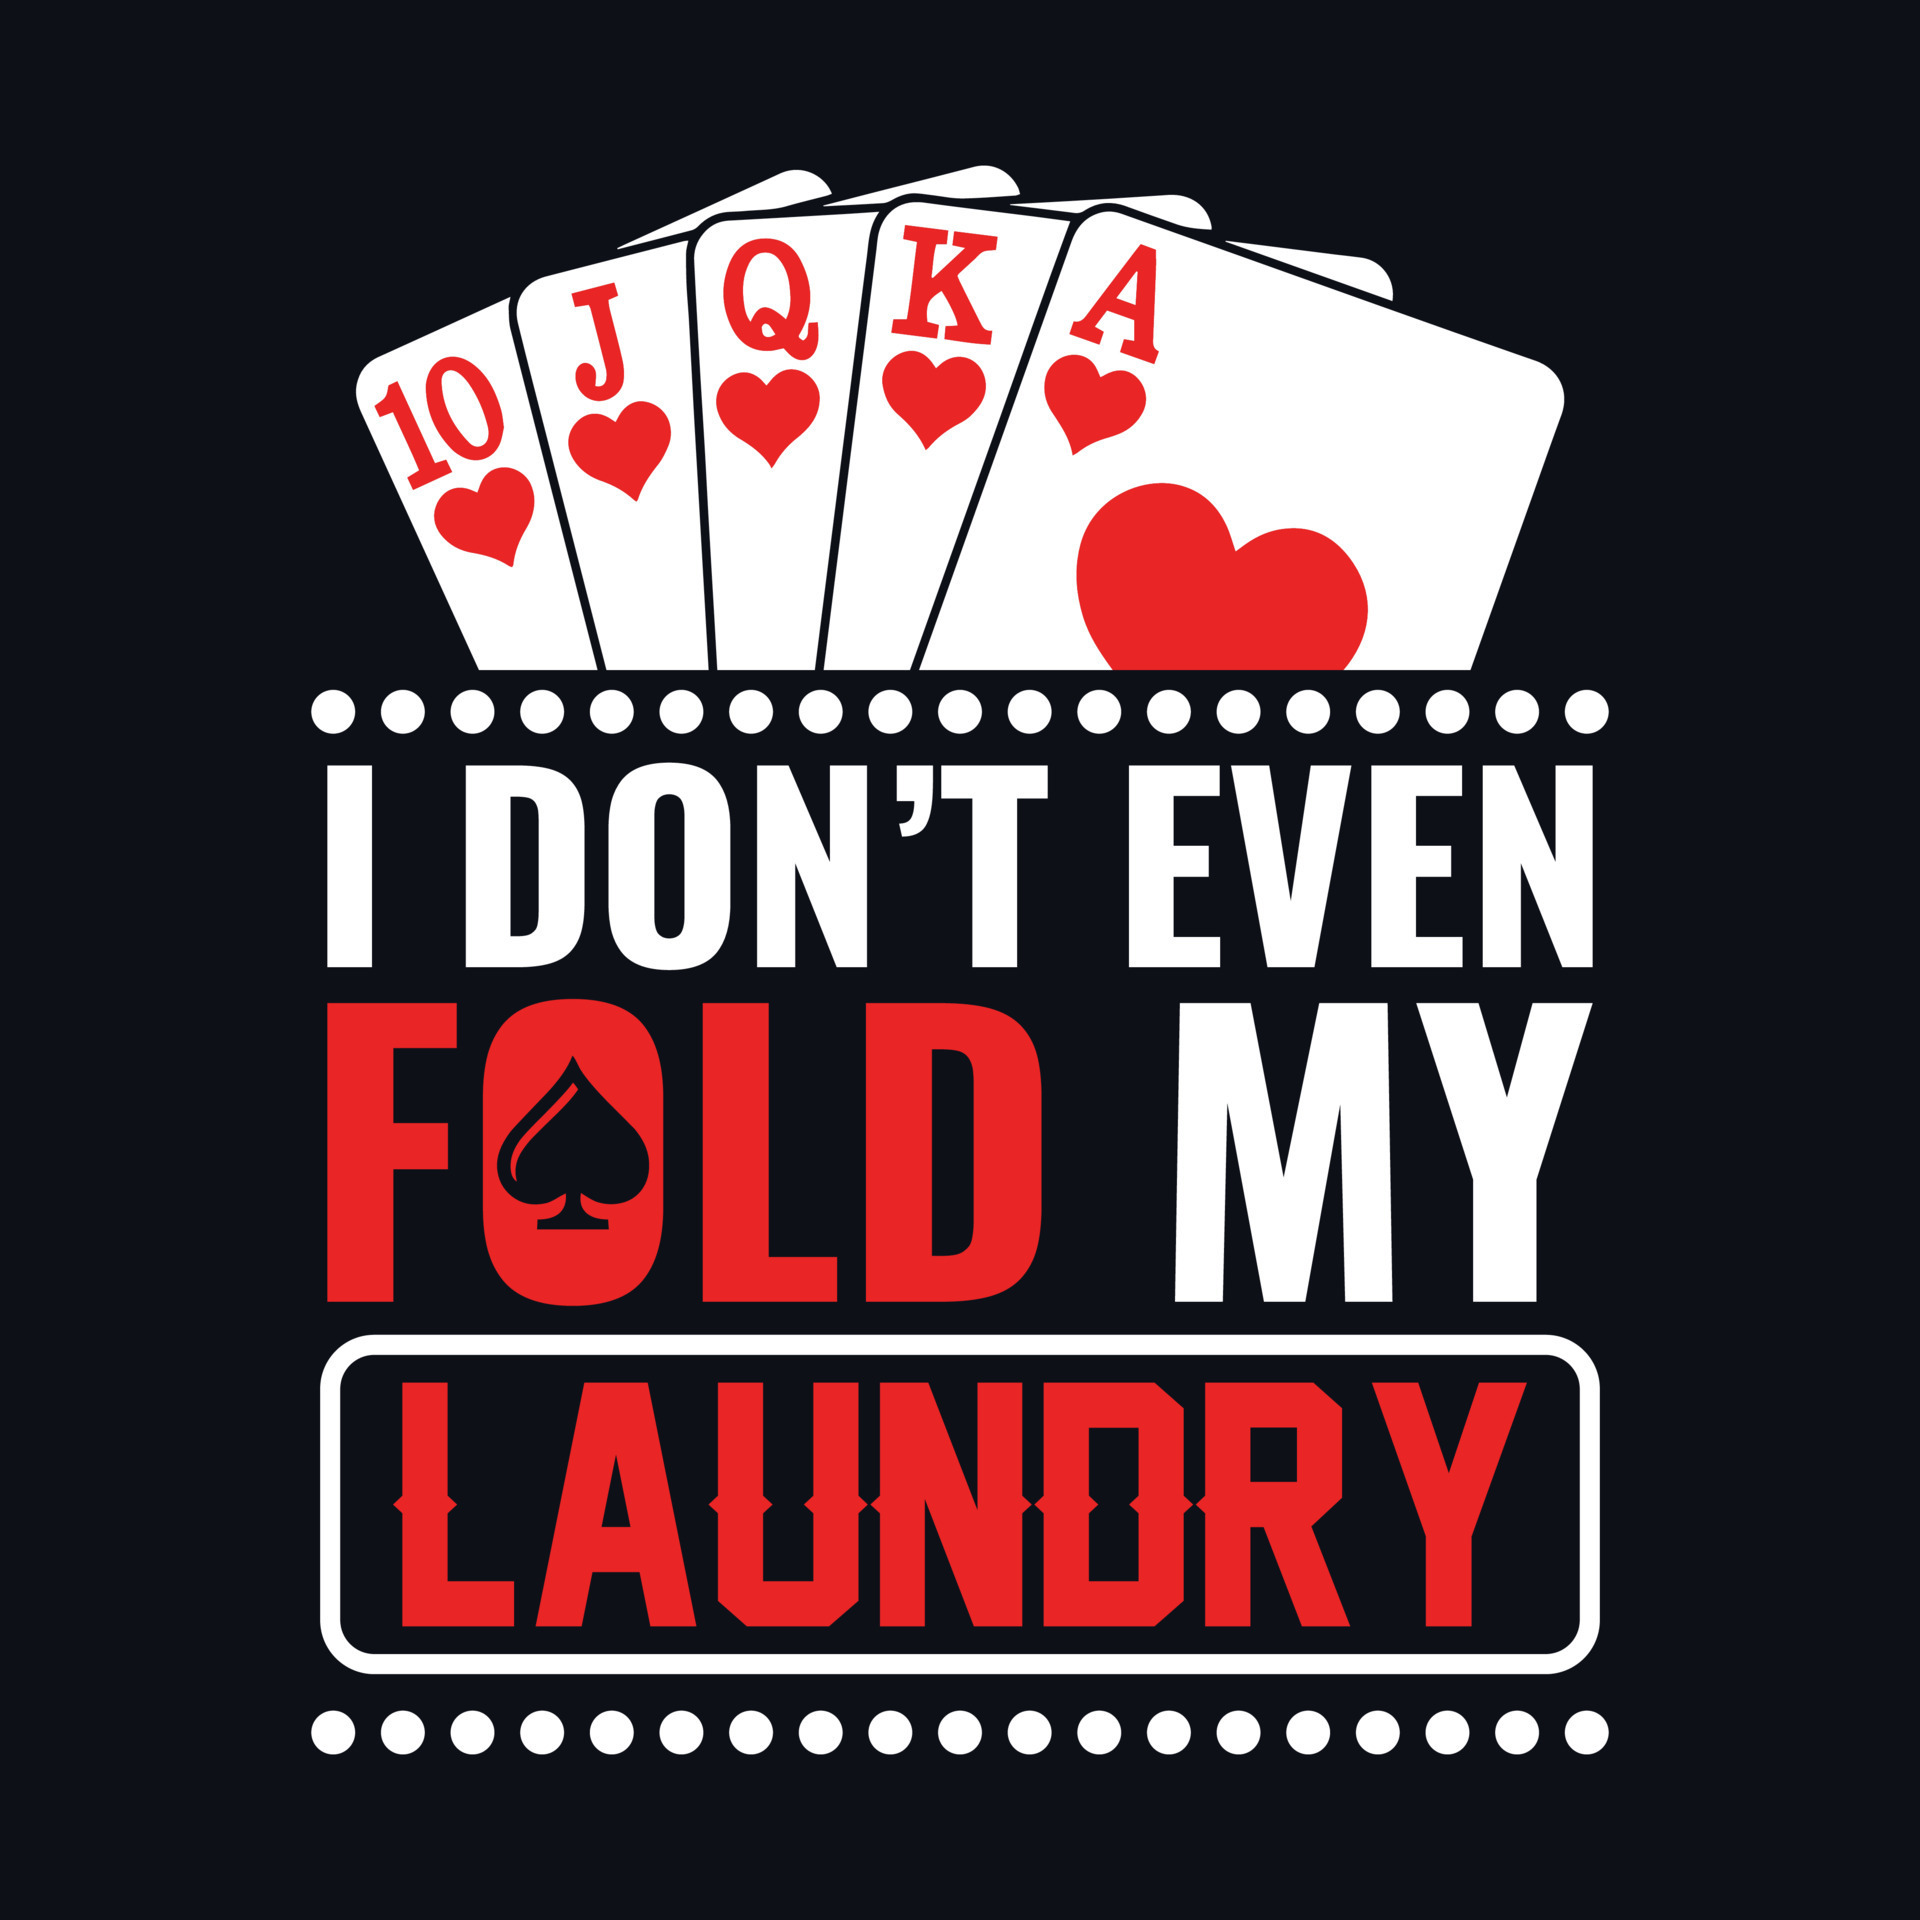 https://static.vecteezy.com/system/resources/previews/010/568/963/original/i-don-t-even-fold-laundry-poker-quotes-t-shirt-design-graphic-vector.jpg